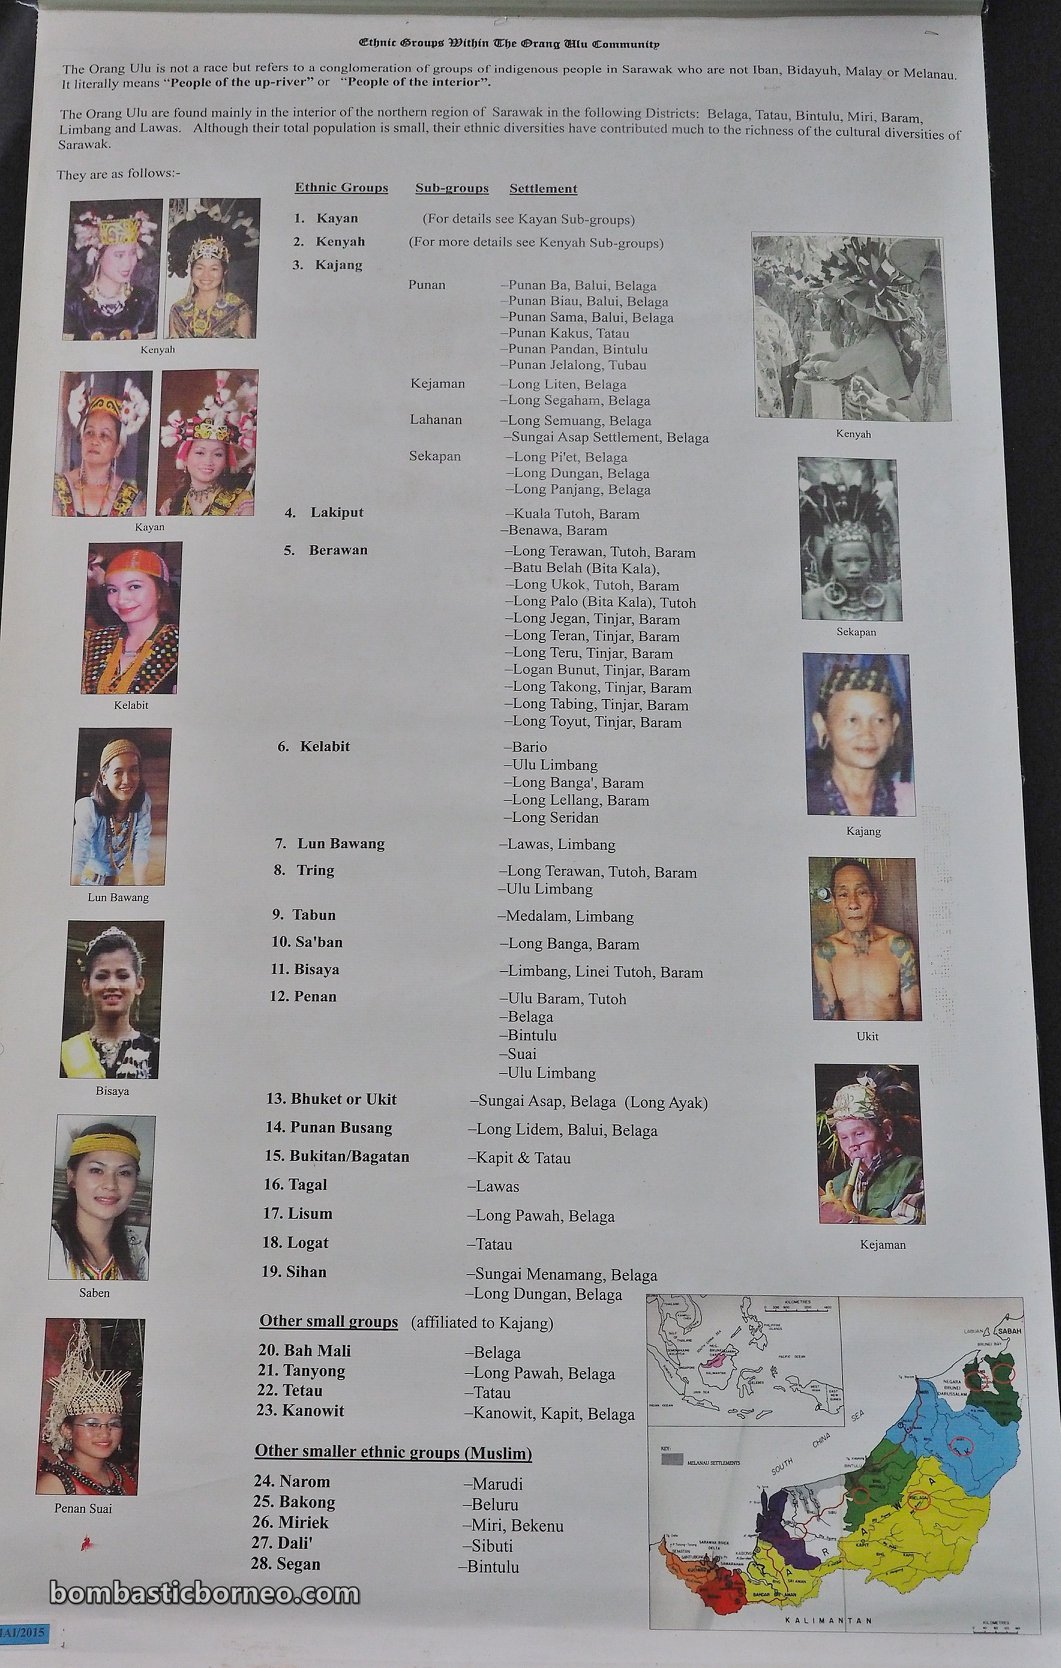 Traditional, culture, event, exhibition, backpackers, Borneo, Malaysia, dayak, native, tribal, tribe, Tourism, travel guide, 探索婆罗洲民族, 砂拉越土著部落, 马来西亚原住民